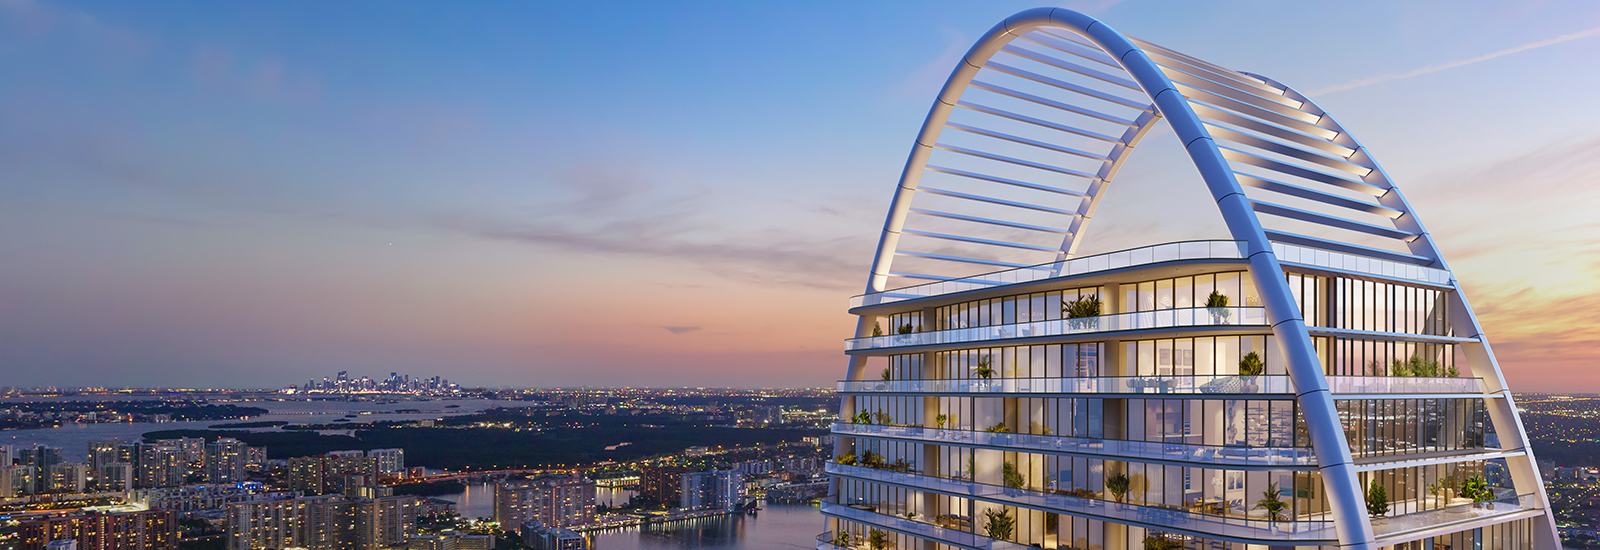 CGI render of top of new residential building in Miami